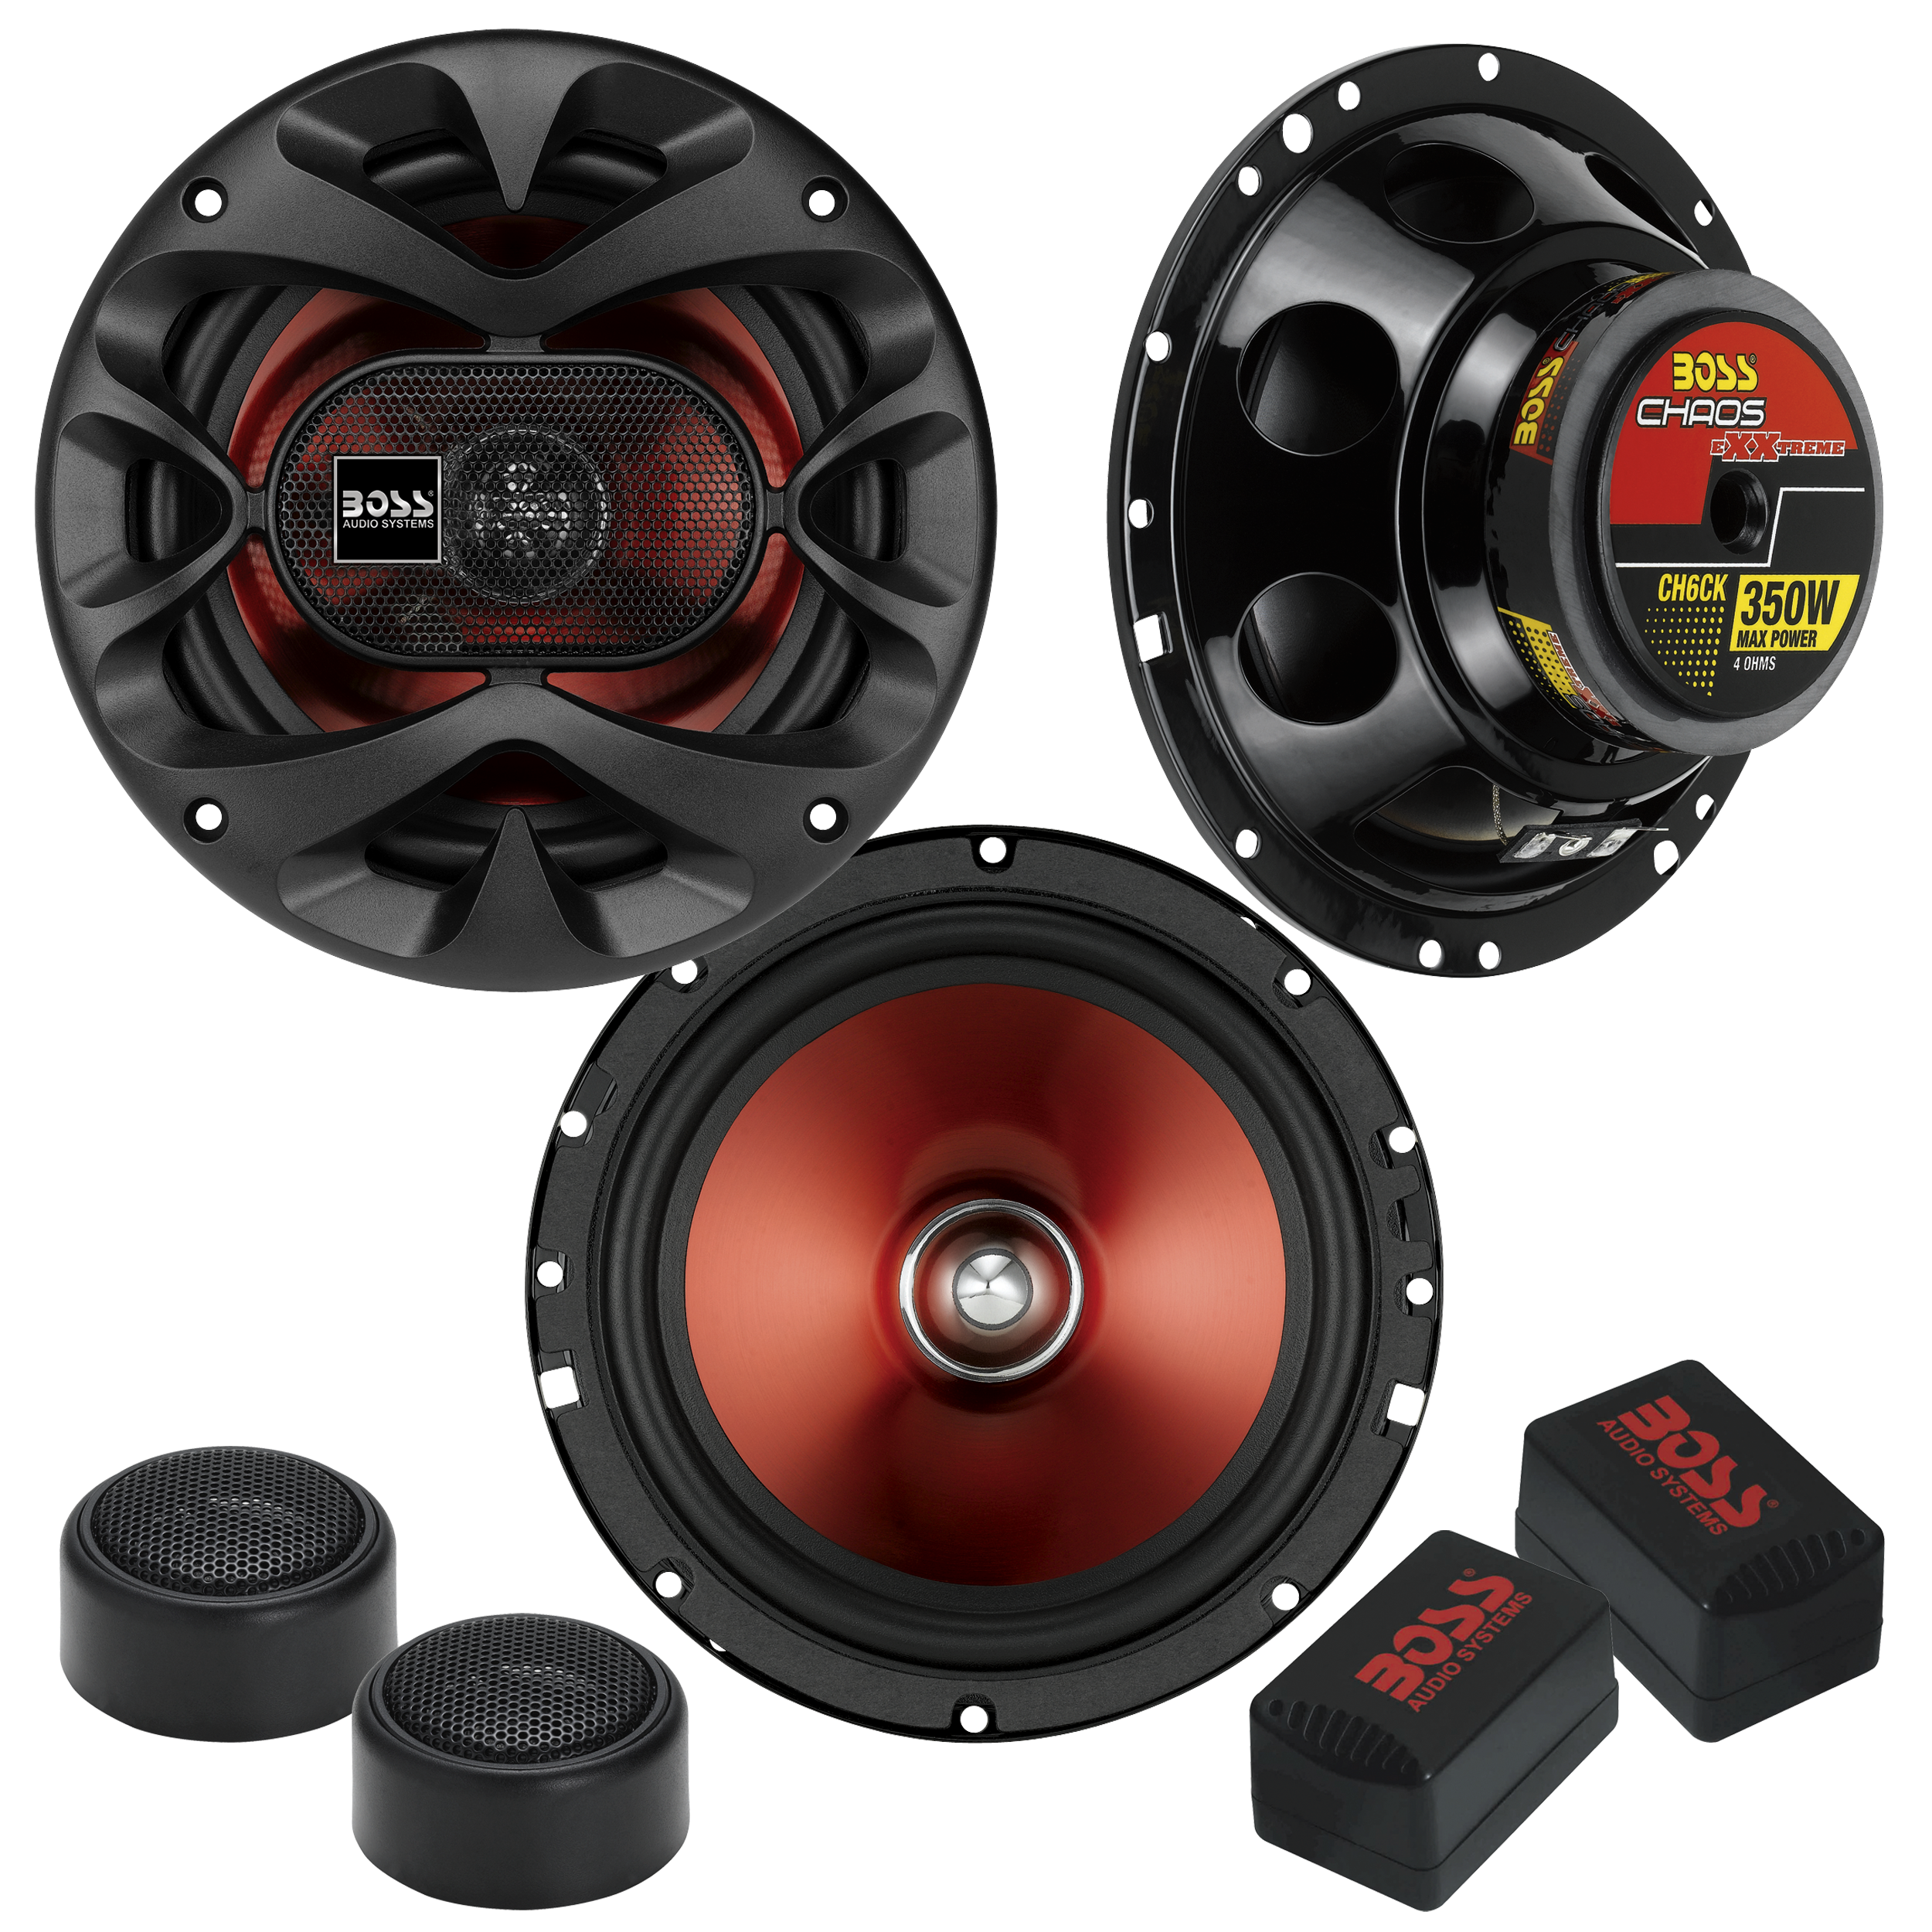 BOSS Audio Systems cH6cK component car Speakers - 350 Watts of Max Power  and 175 Watts Per Set, 2 6.5 Inch Speakers crossovers Tweet